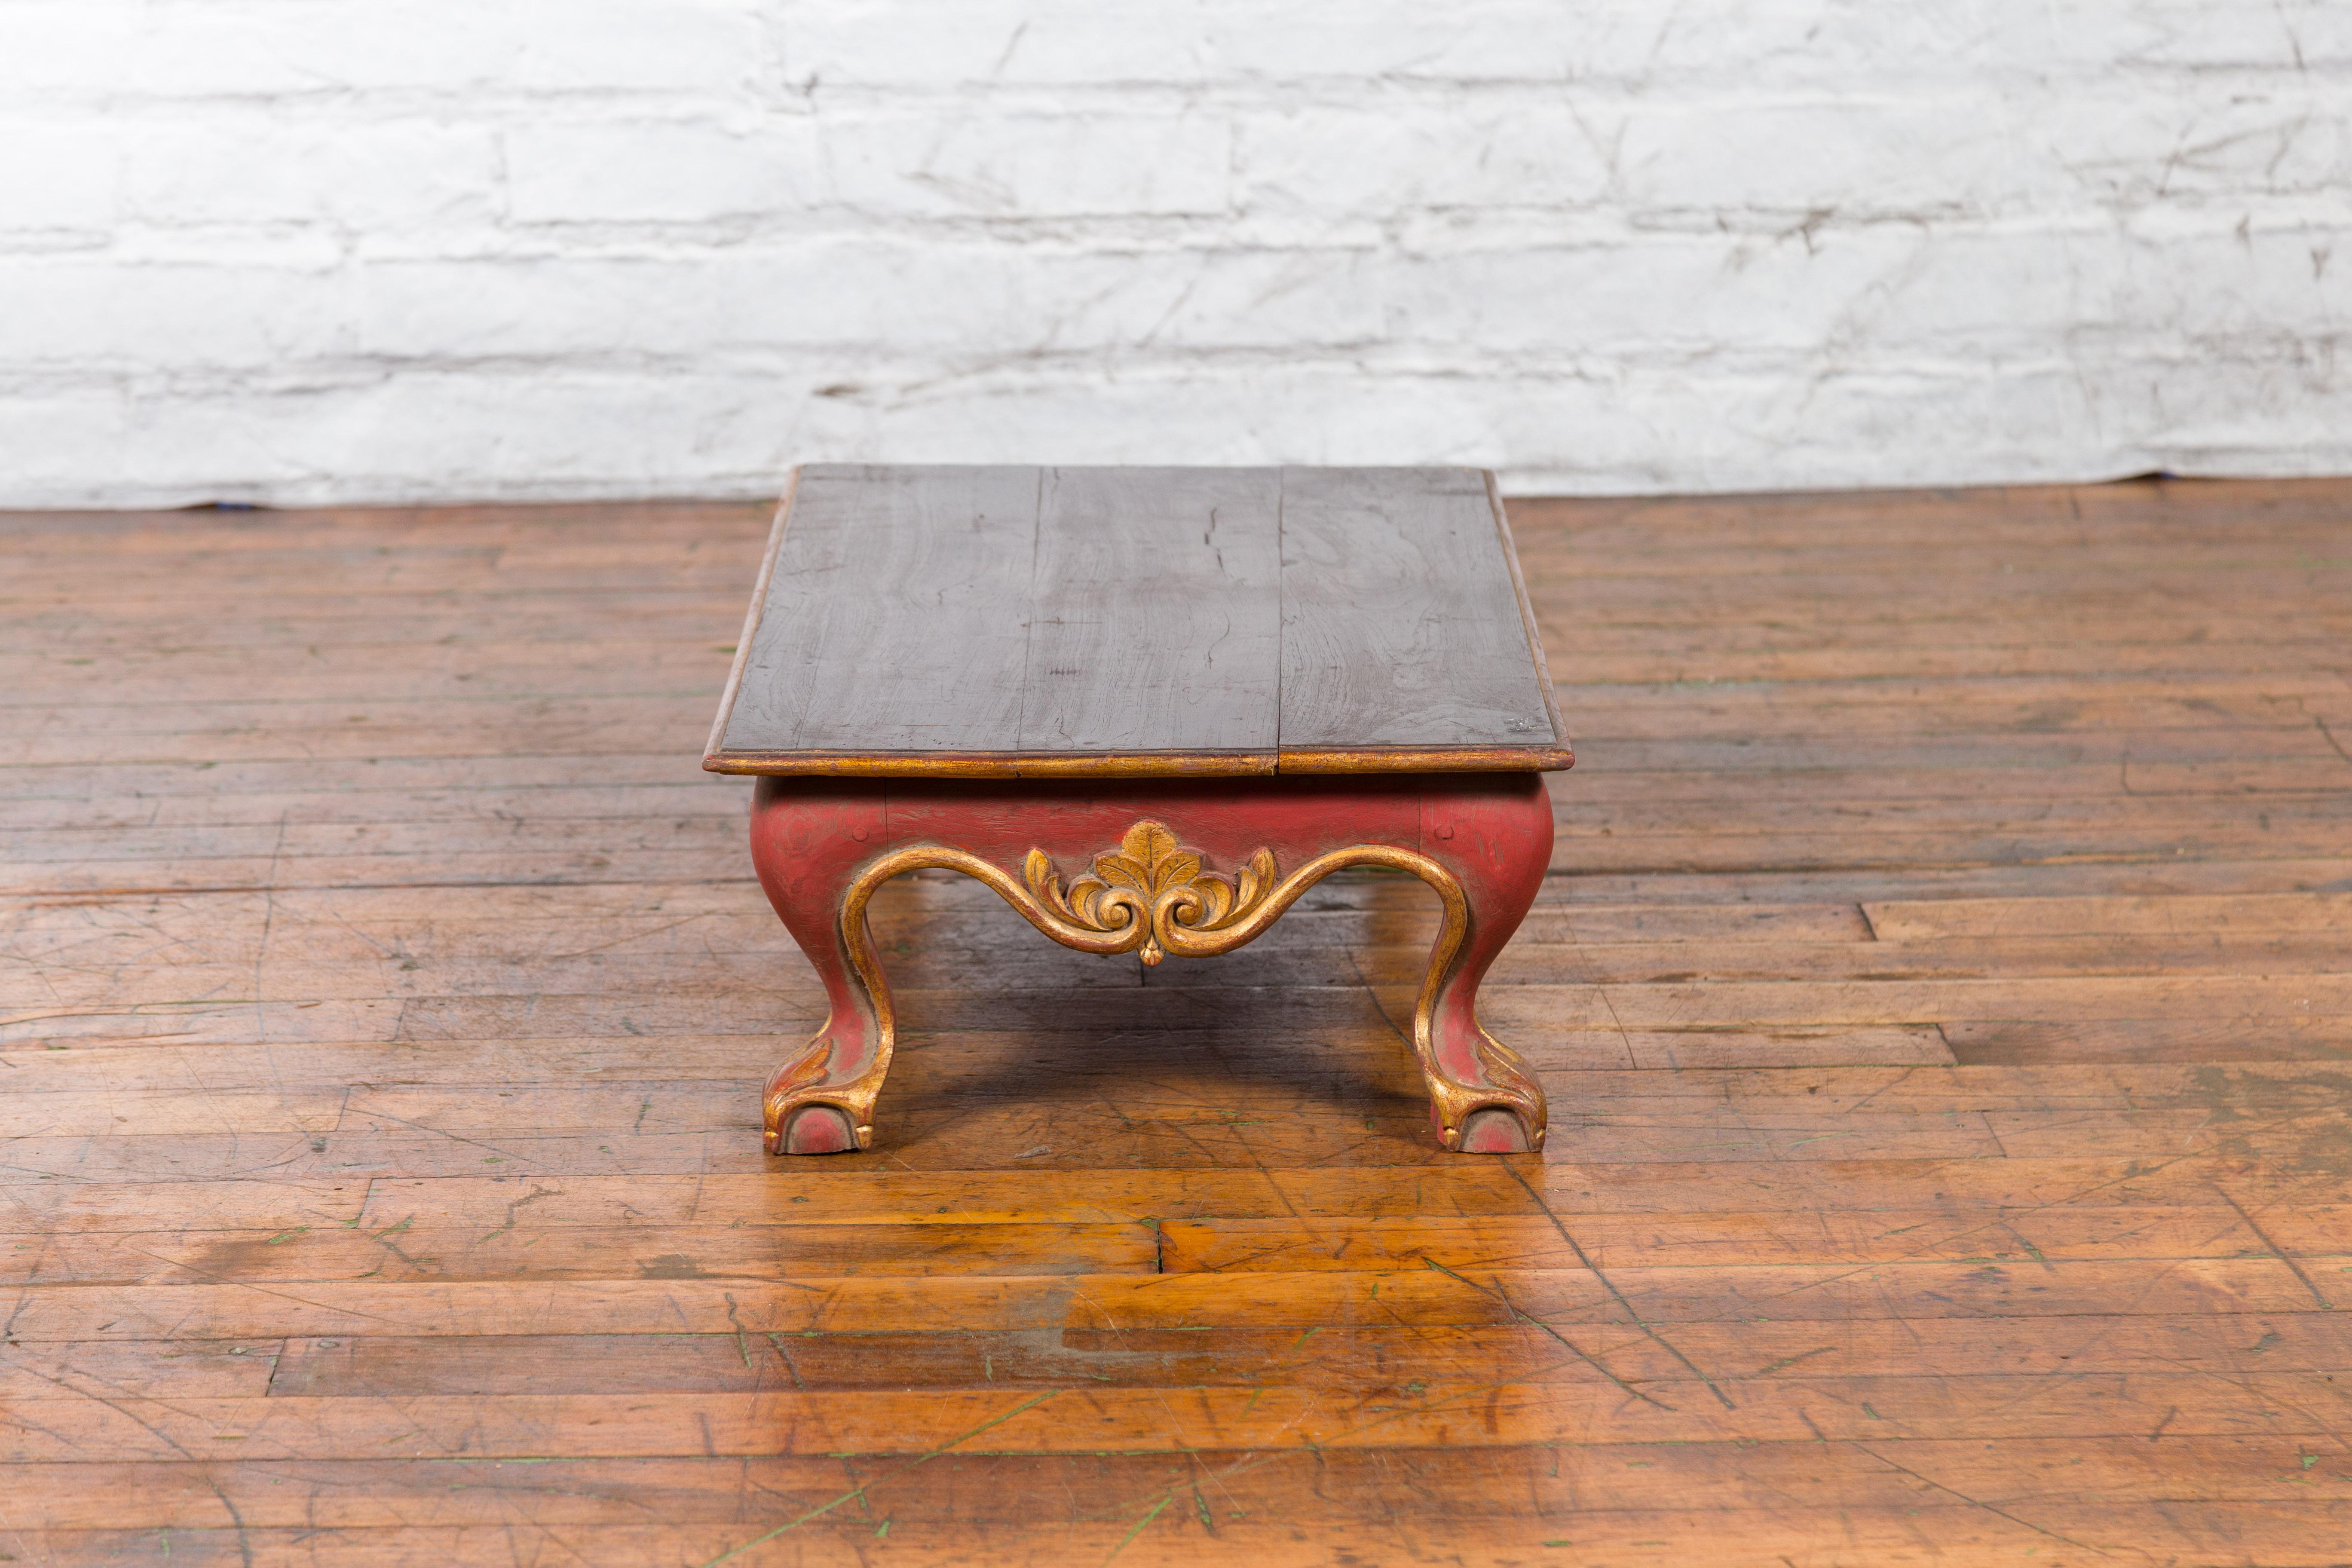 Indonesian Vintage Rococo Style Red and Gold Low Table with Ball-and-claw Feet For Sale 5